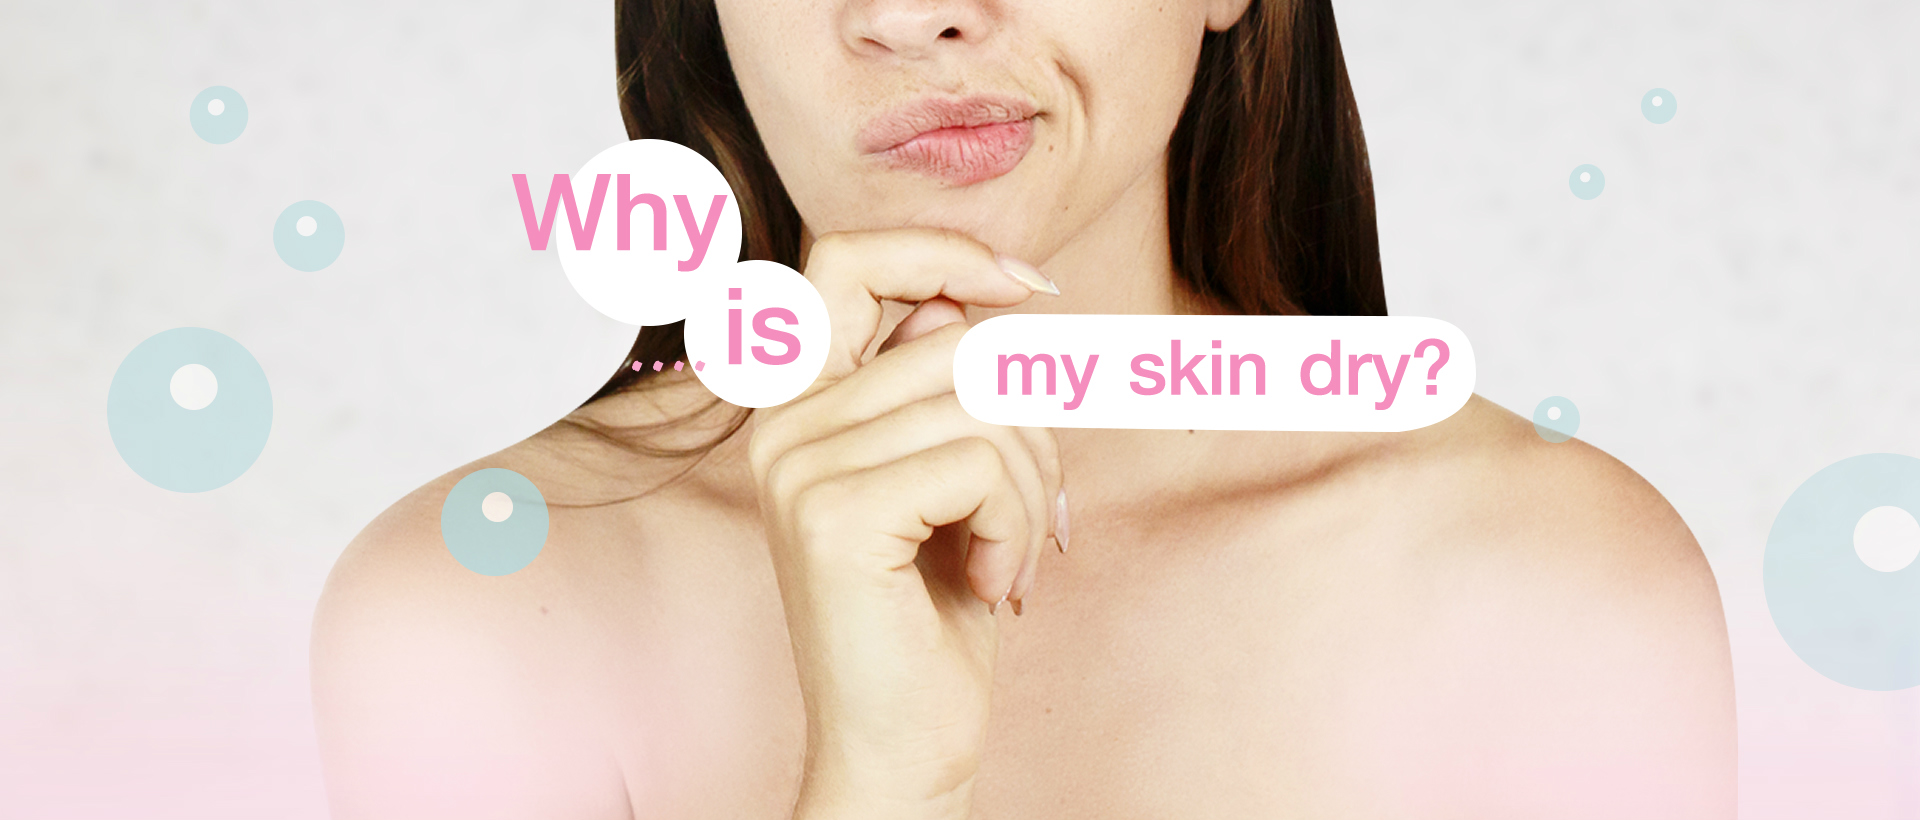 Why is my skin dry?